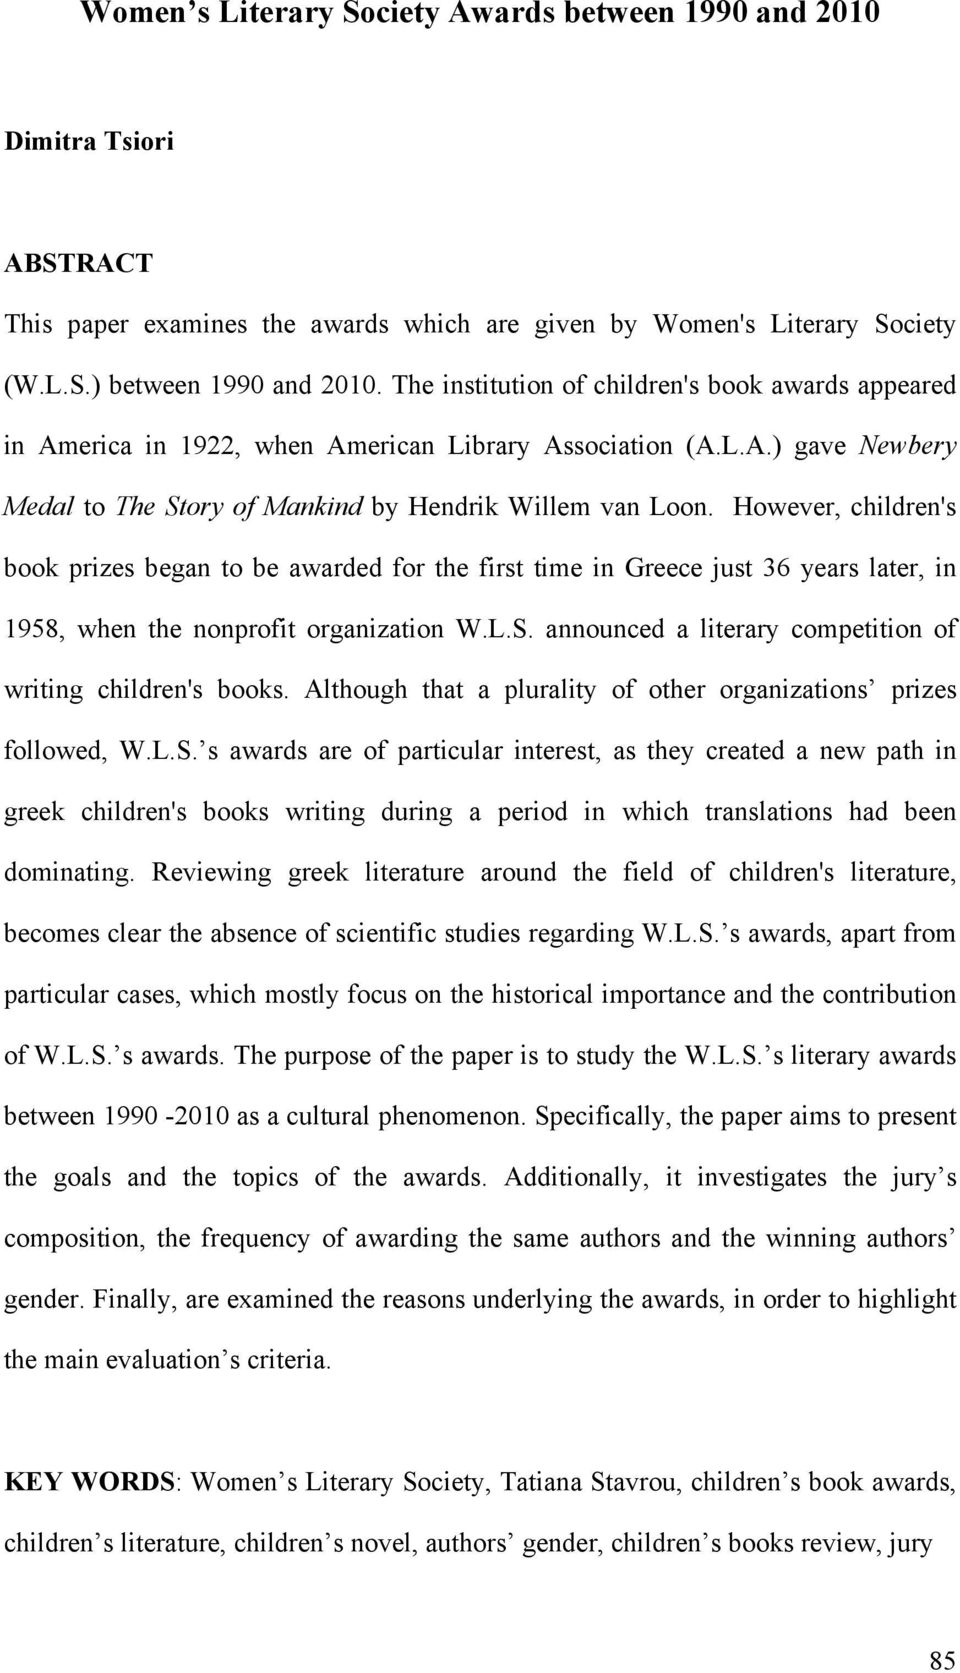 However, children's book prizes began to be awarded for the first time in Greece just 36 years later, in 1958, when the nonprofit organization W.L.S.